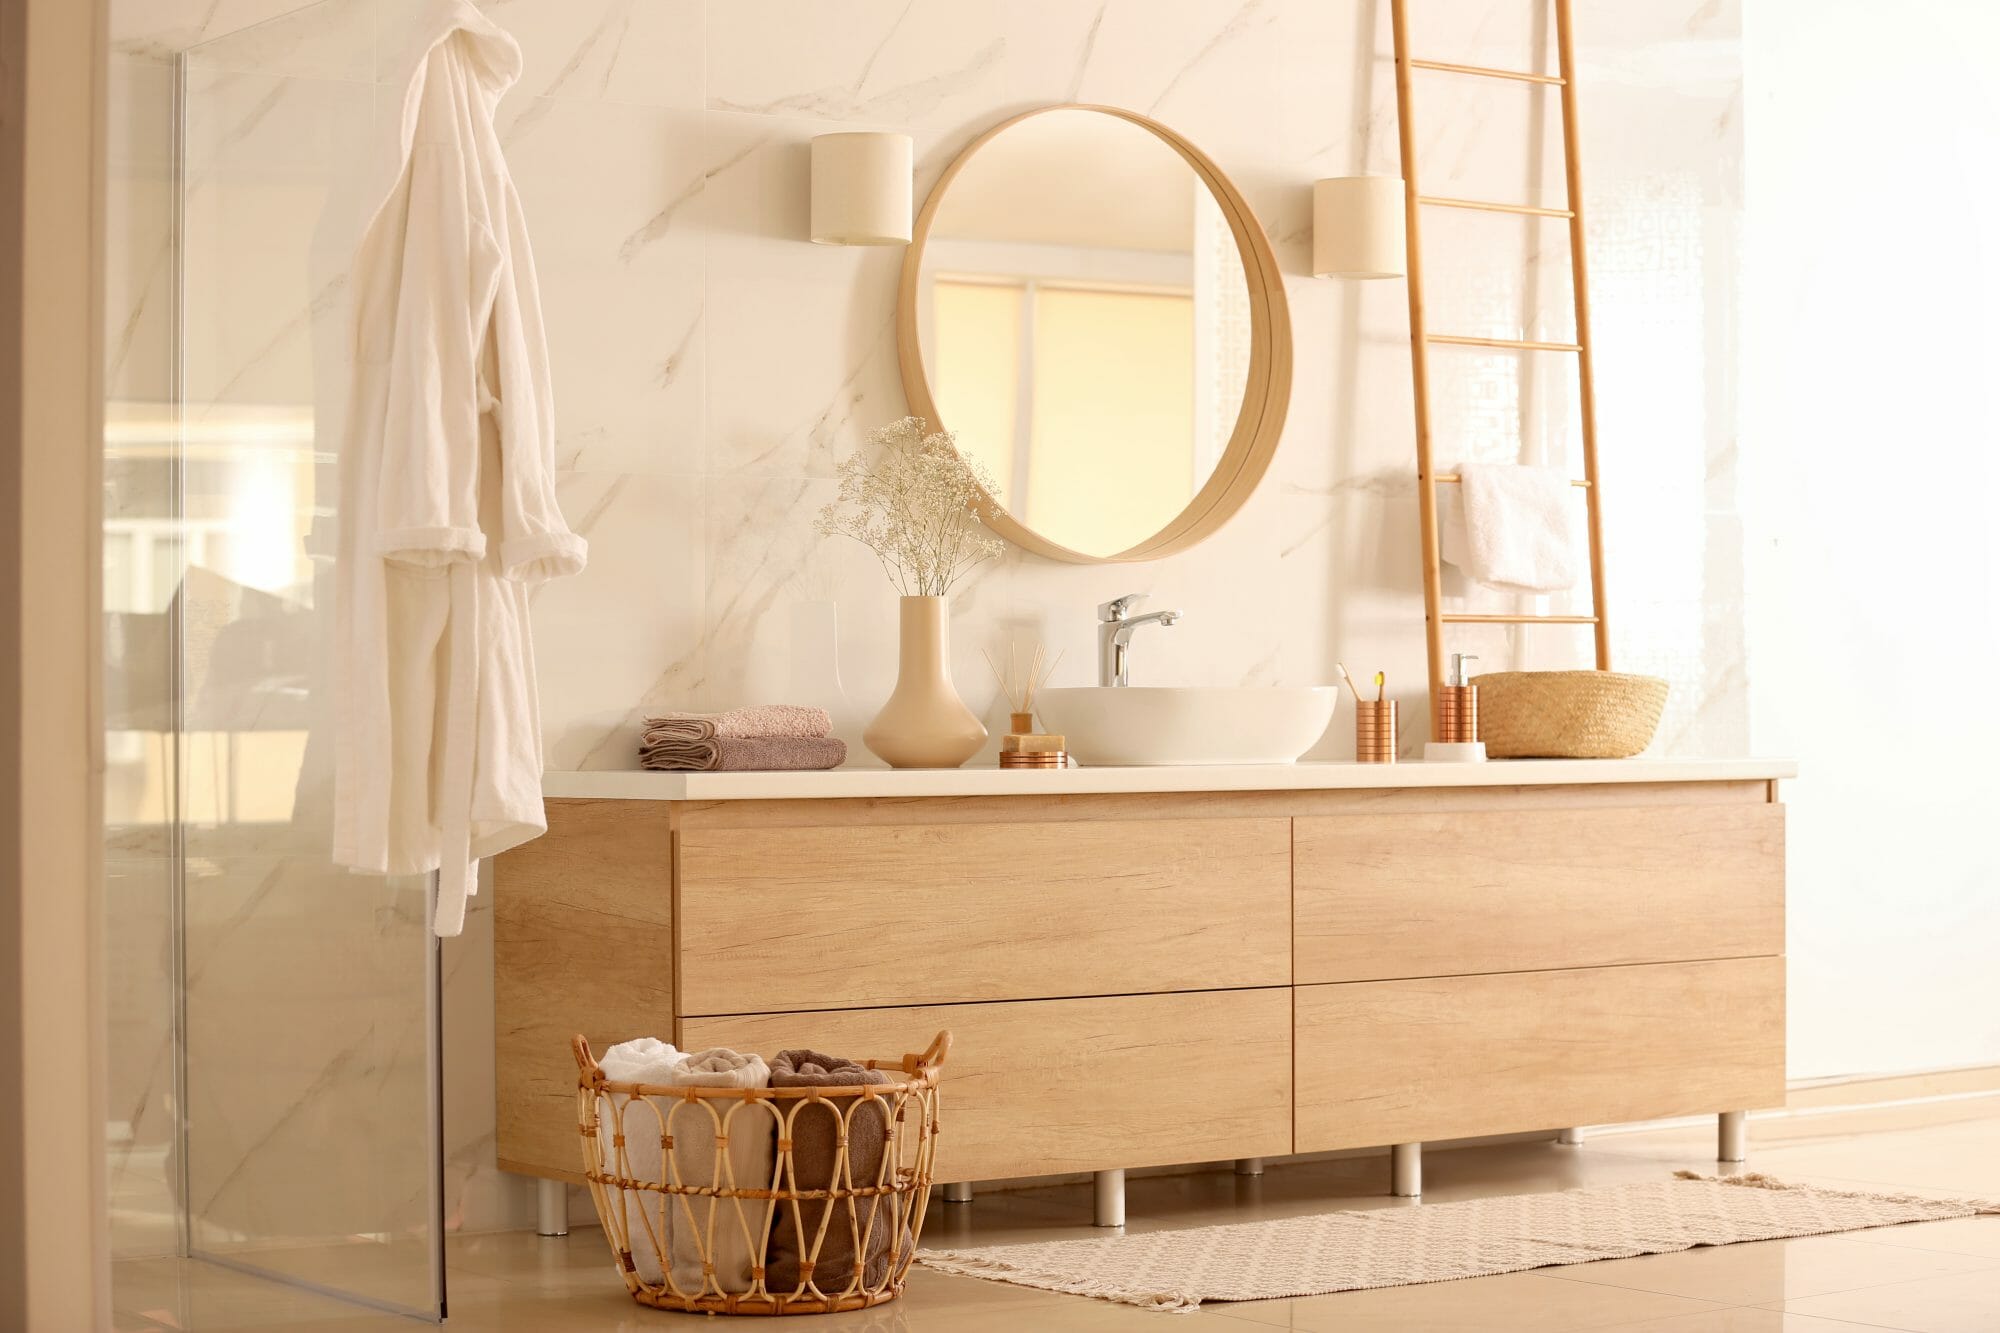 How to match bath accessories with bathroom designs